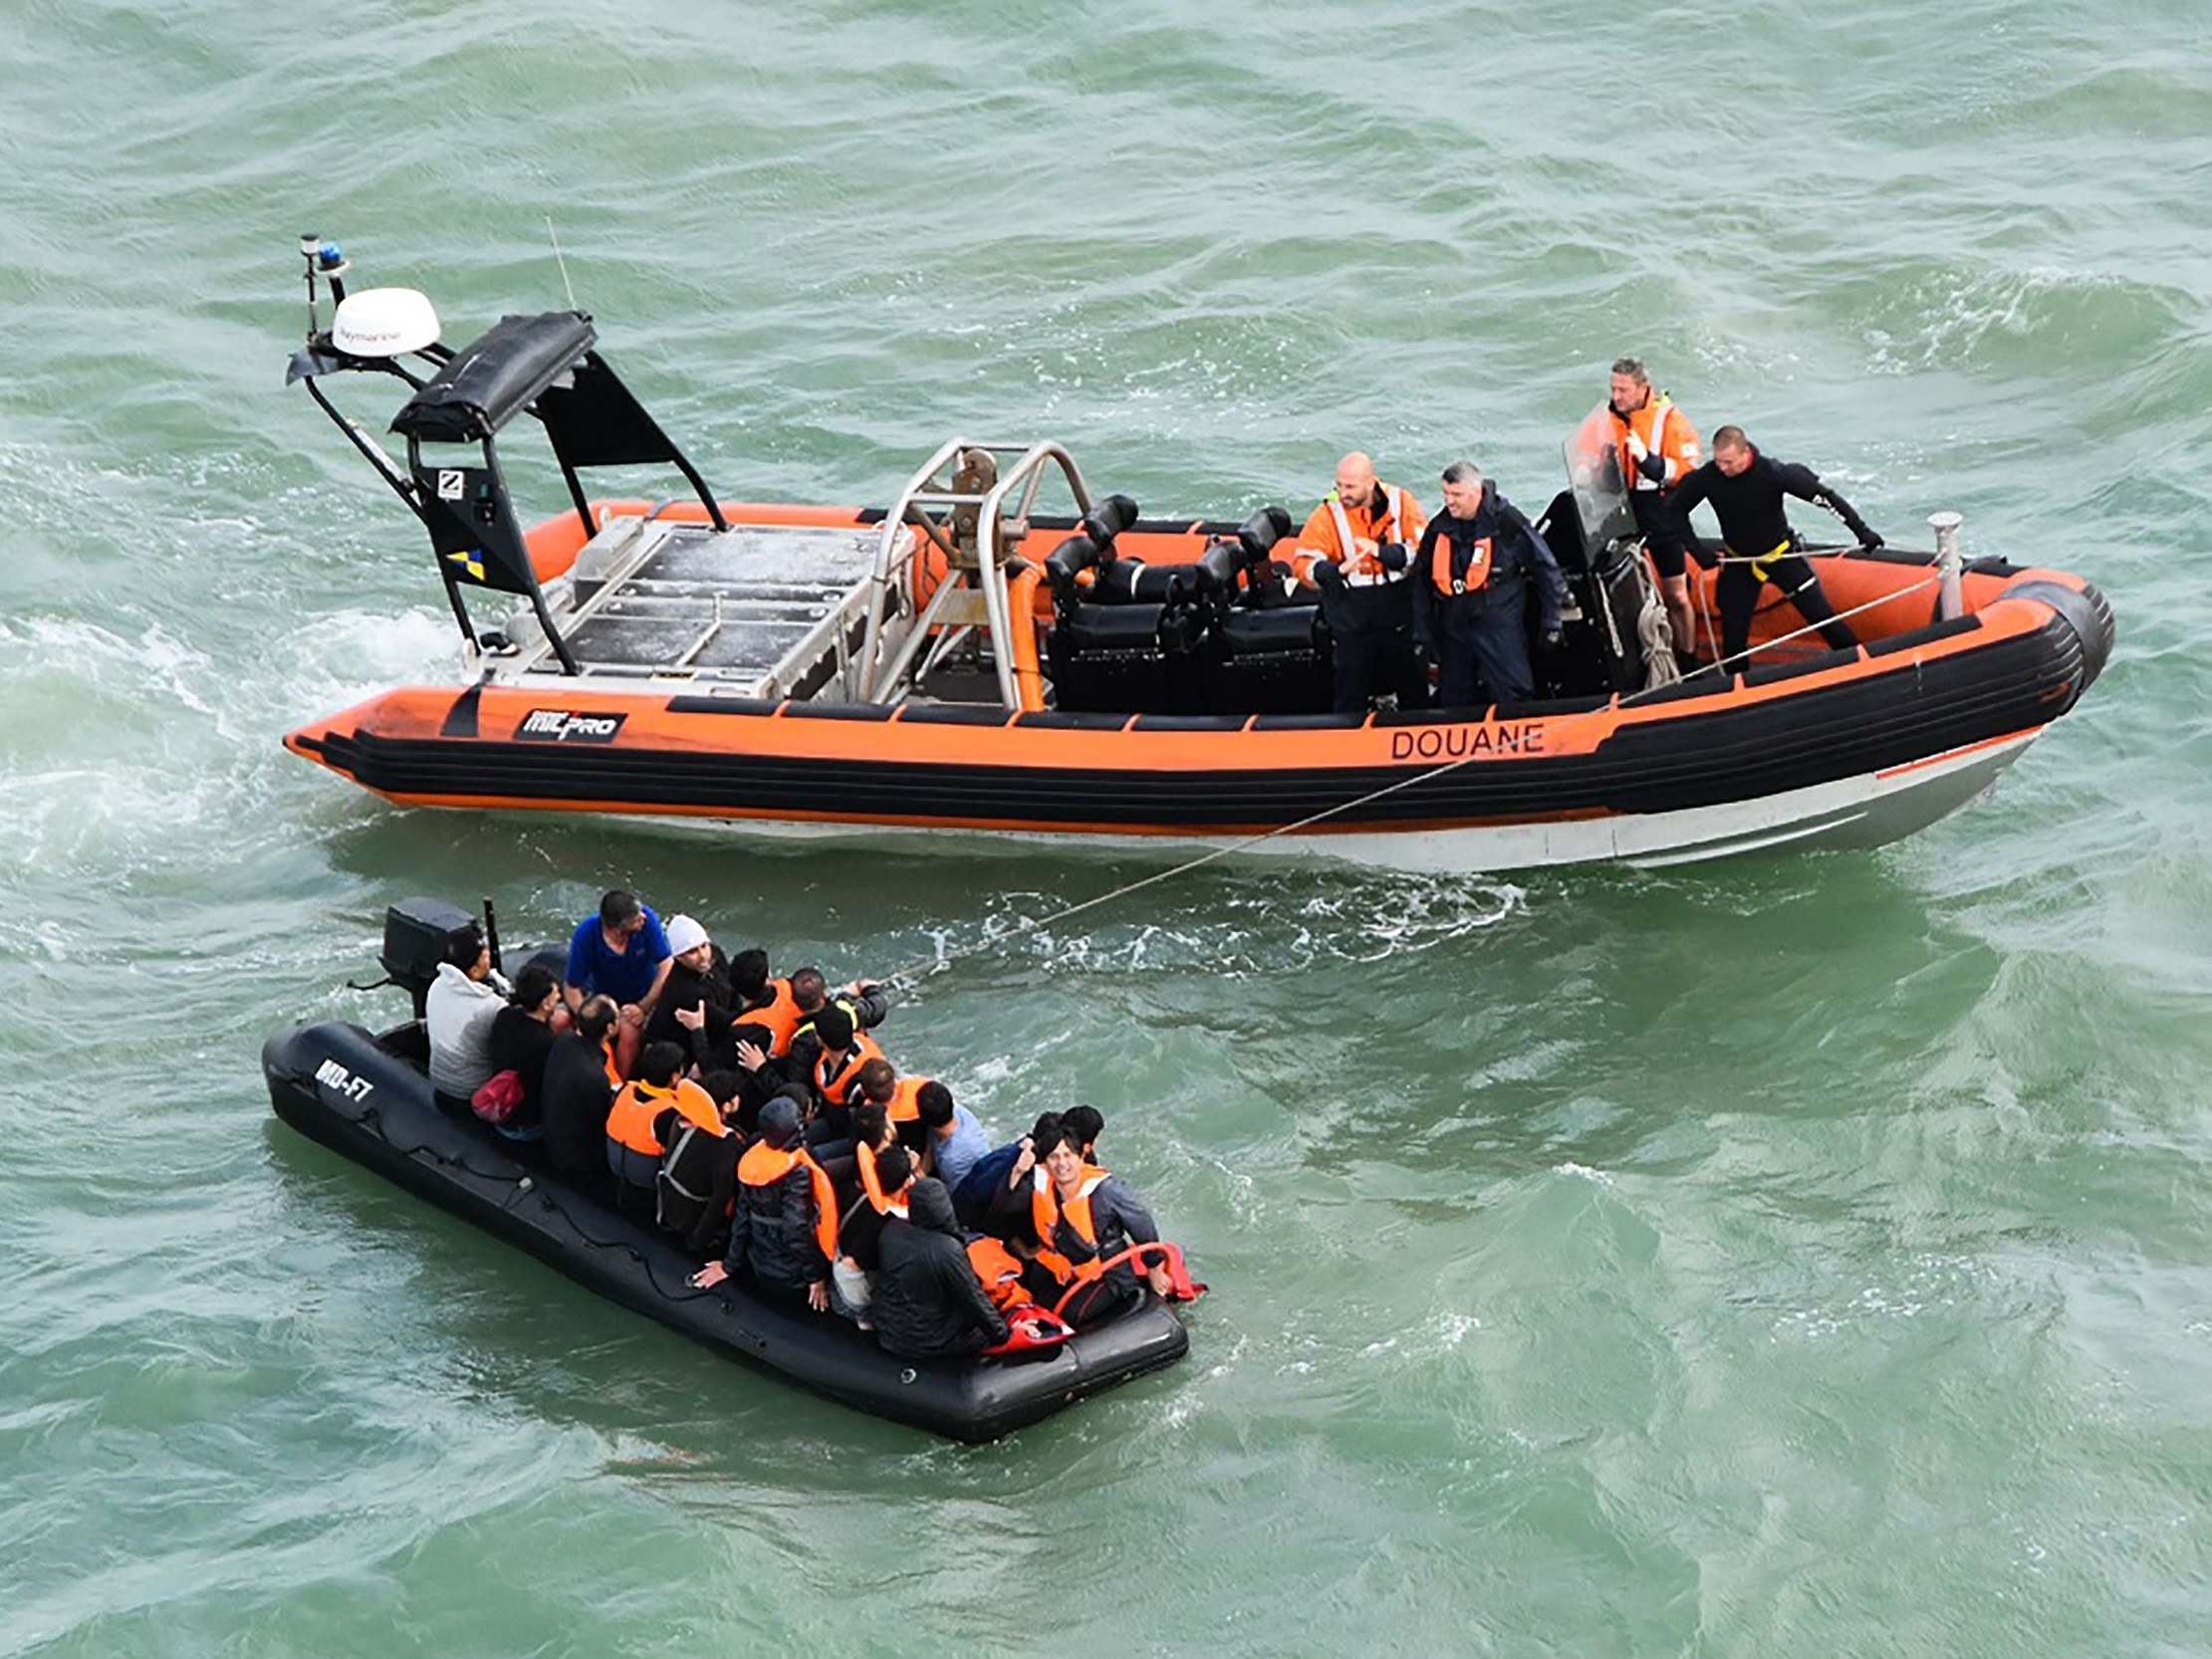 On 9 August, three of 20 people on a small boat headed to the UK were reported to have gone overboard by HM Coastguard. Two were rescued, but an Iranian woman’s body was not found